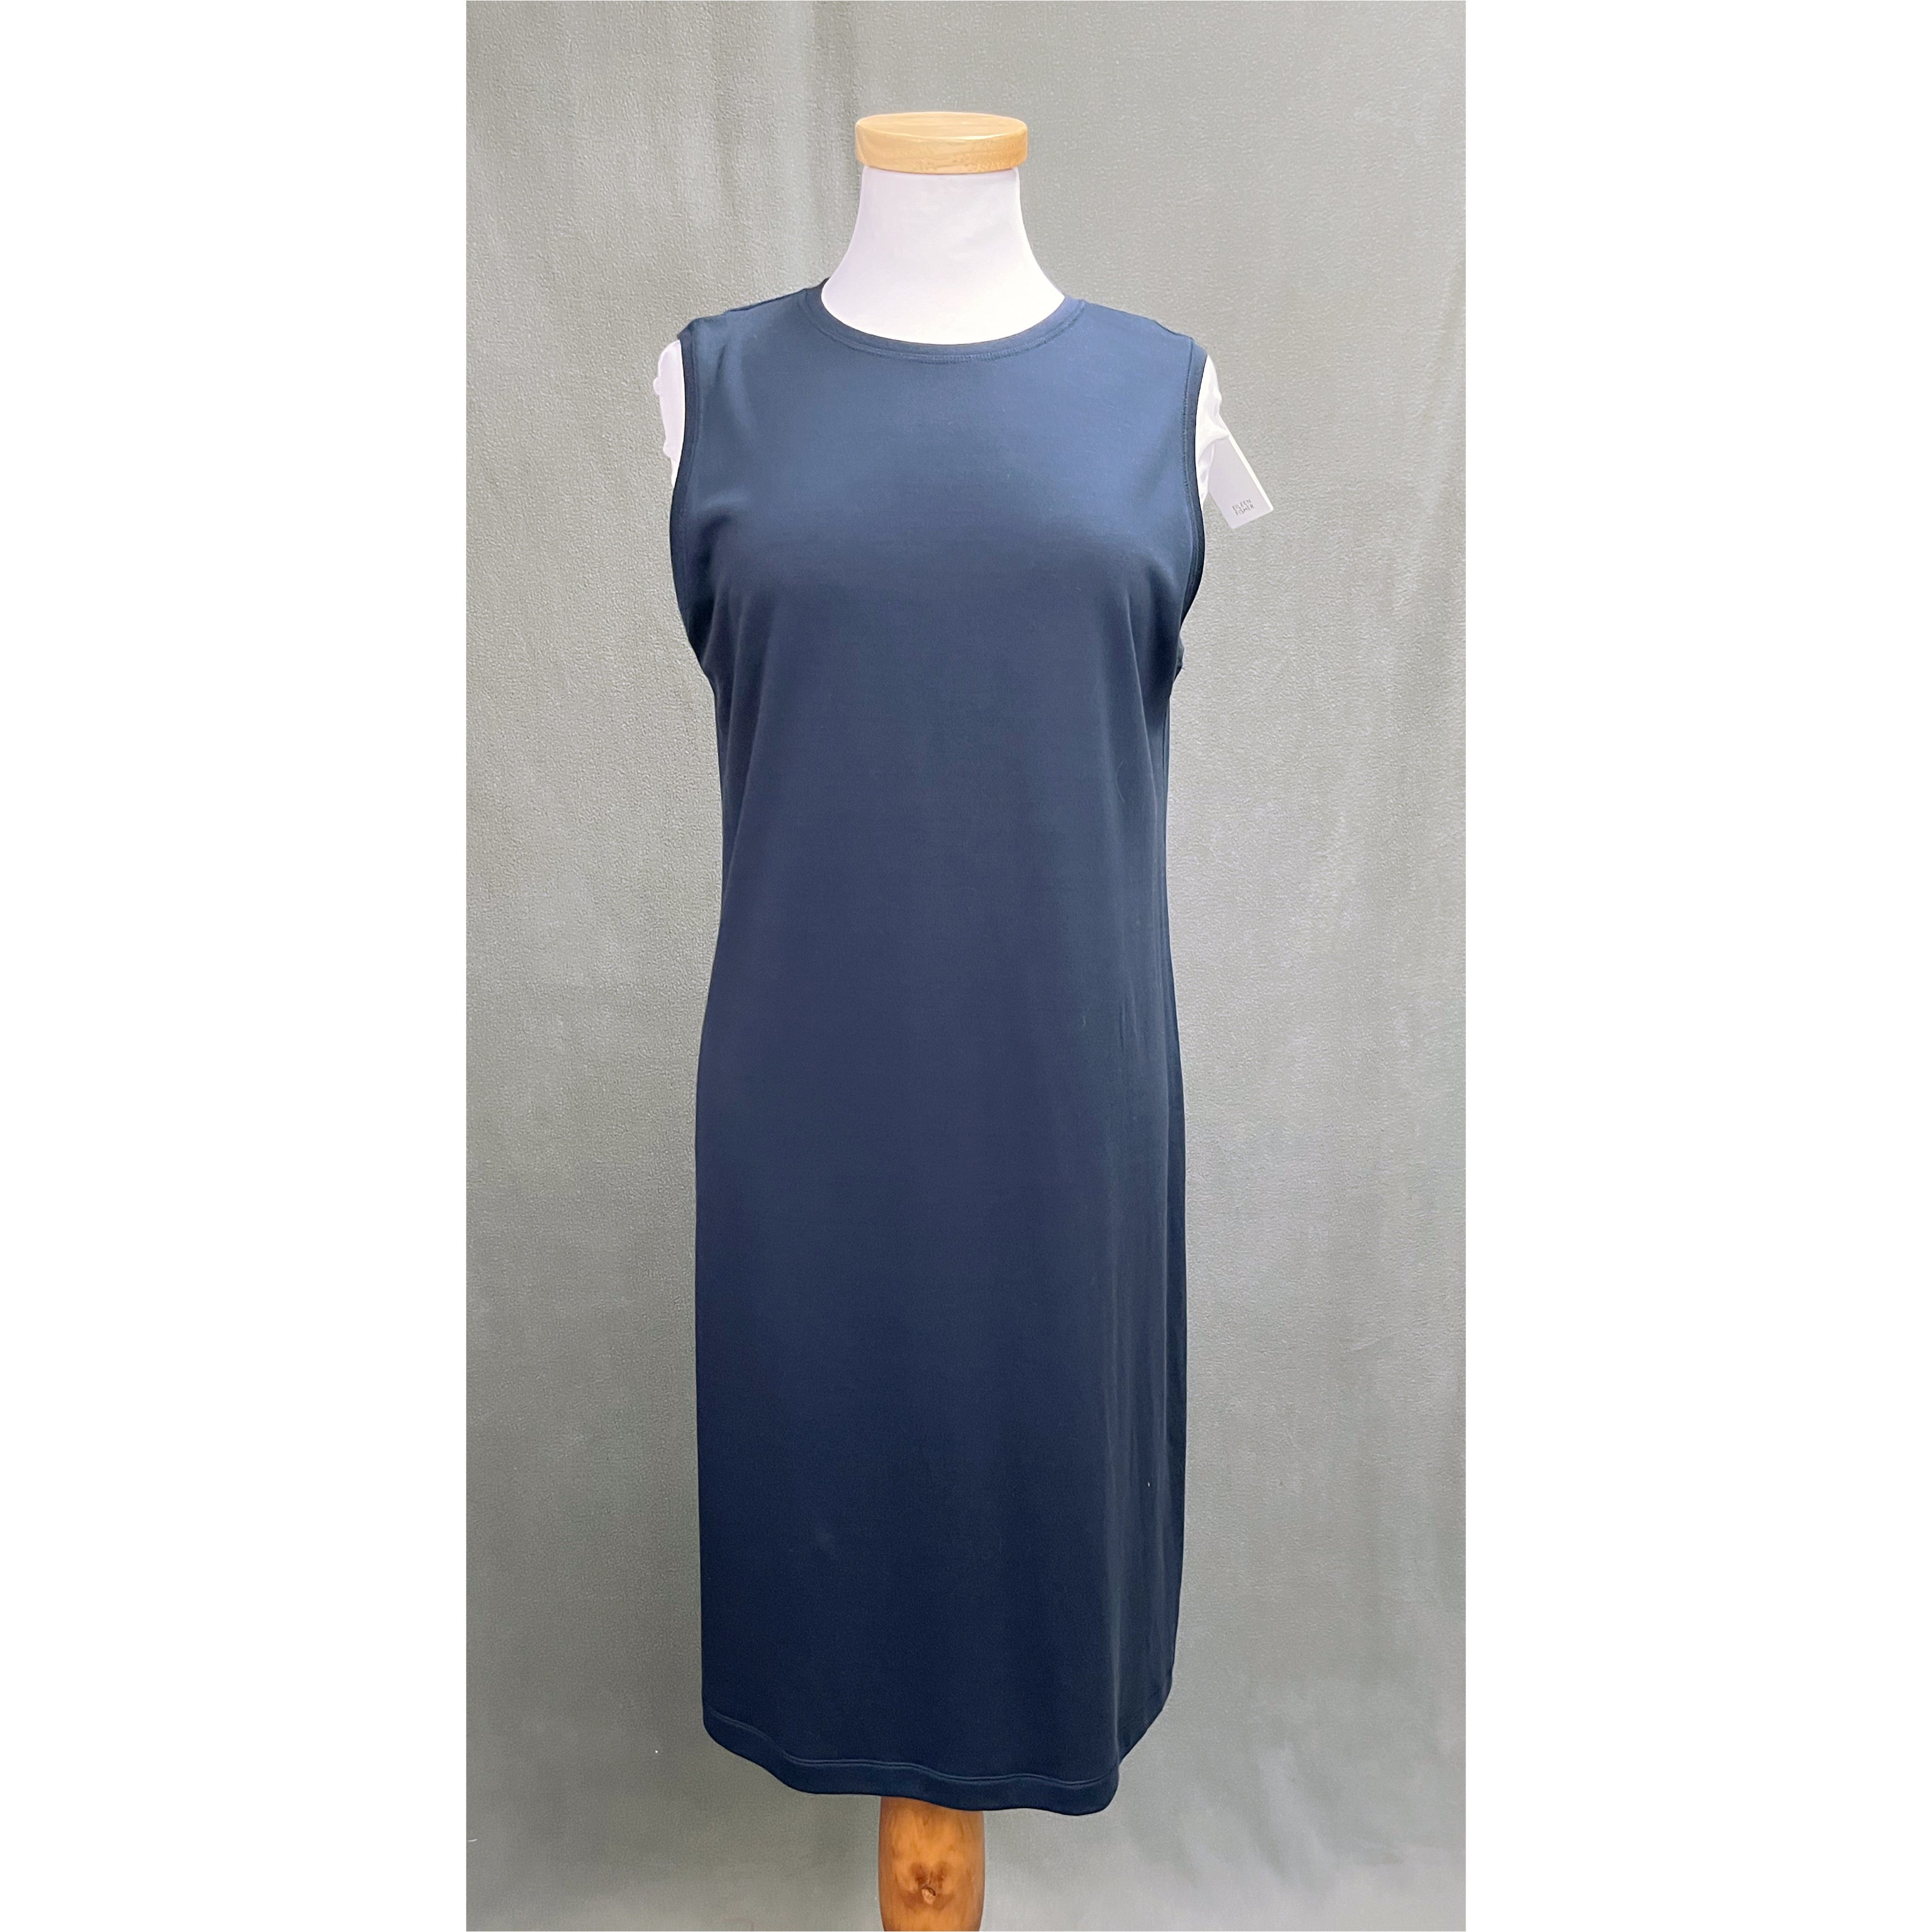 Eileen Fisher navy dress, size S, NEW WITH TAGS!